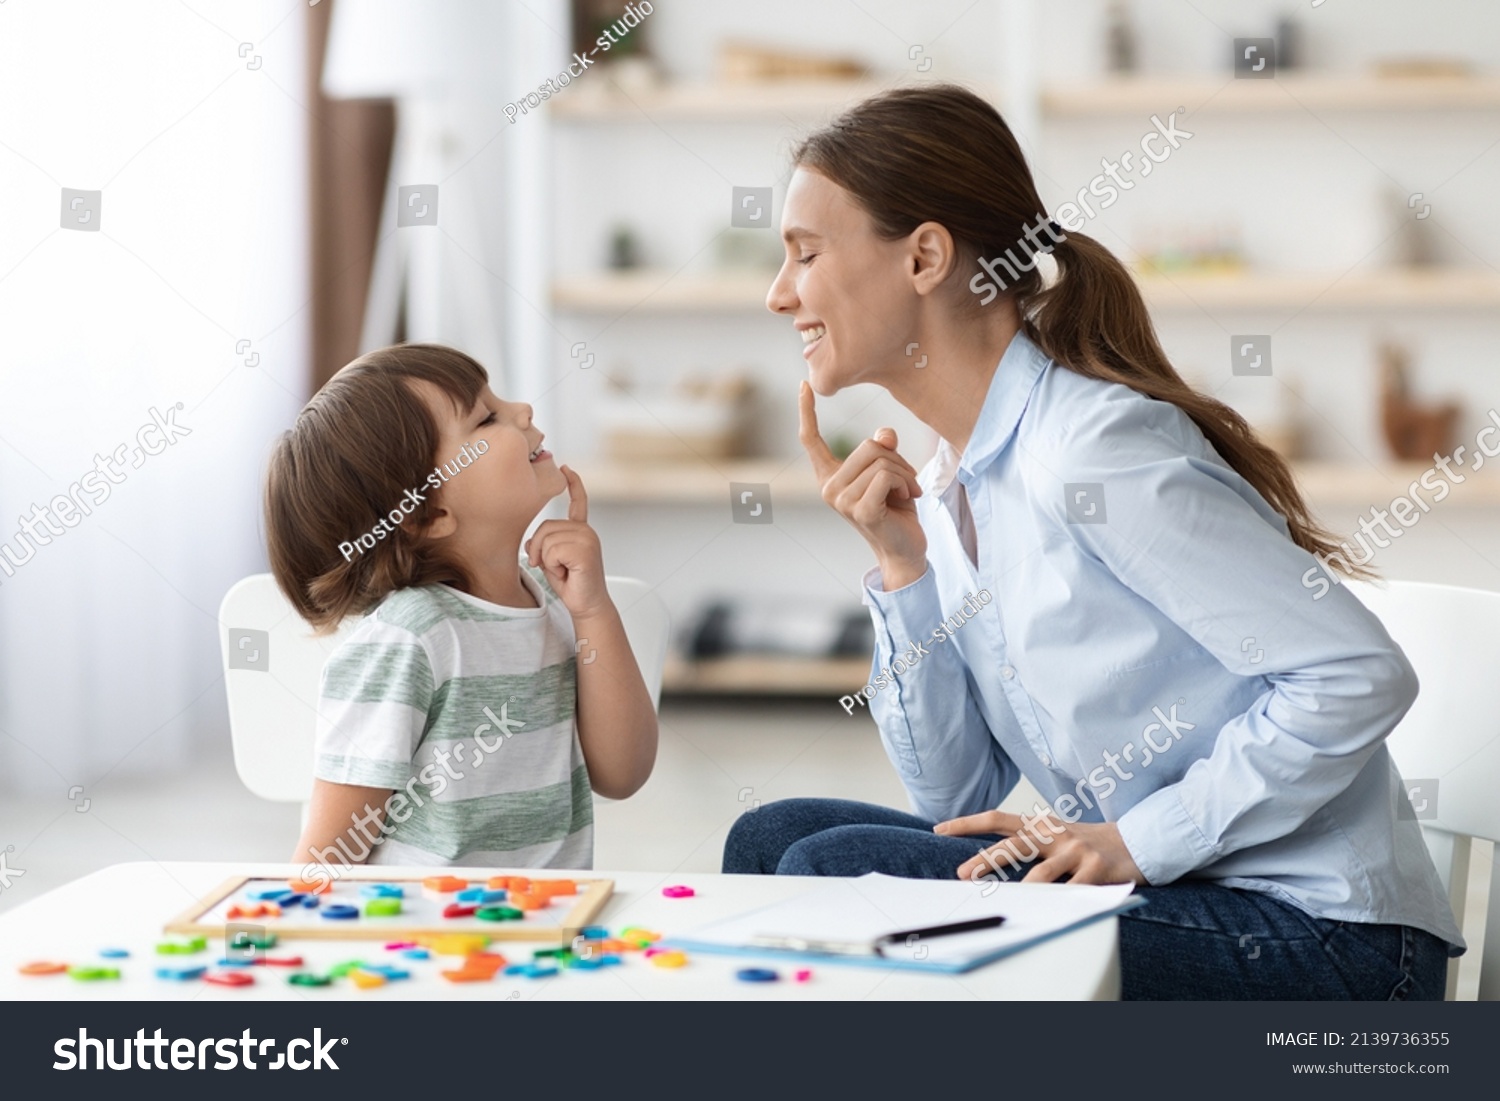 Speech training for kids. Professional woman specialist training with little boy at cabinet, teaching him right articulation exercises, side view #2139736355